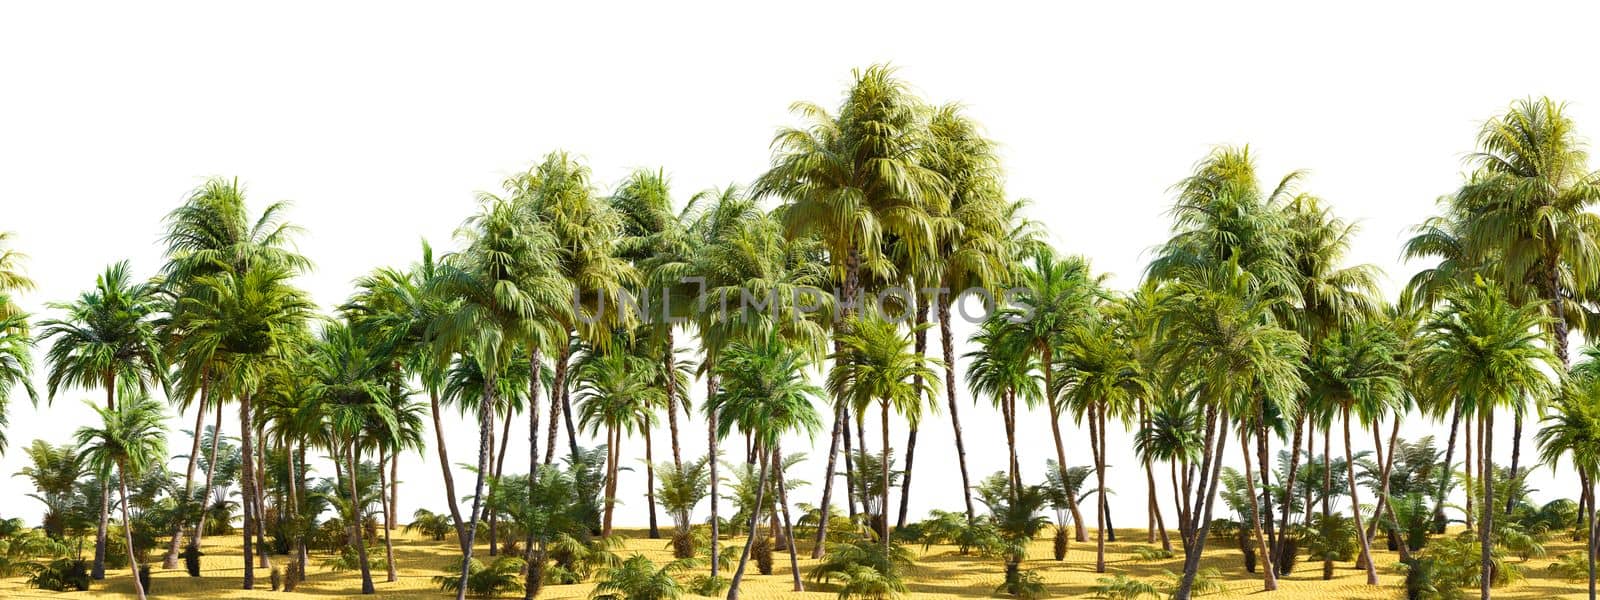 Row of palm trees on a sandy beach on white transparent background. 3D rendering illustration.